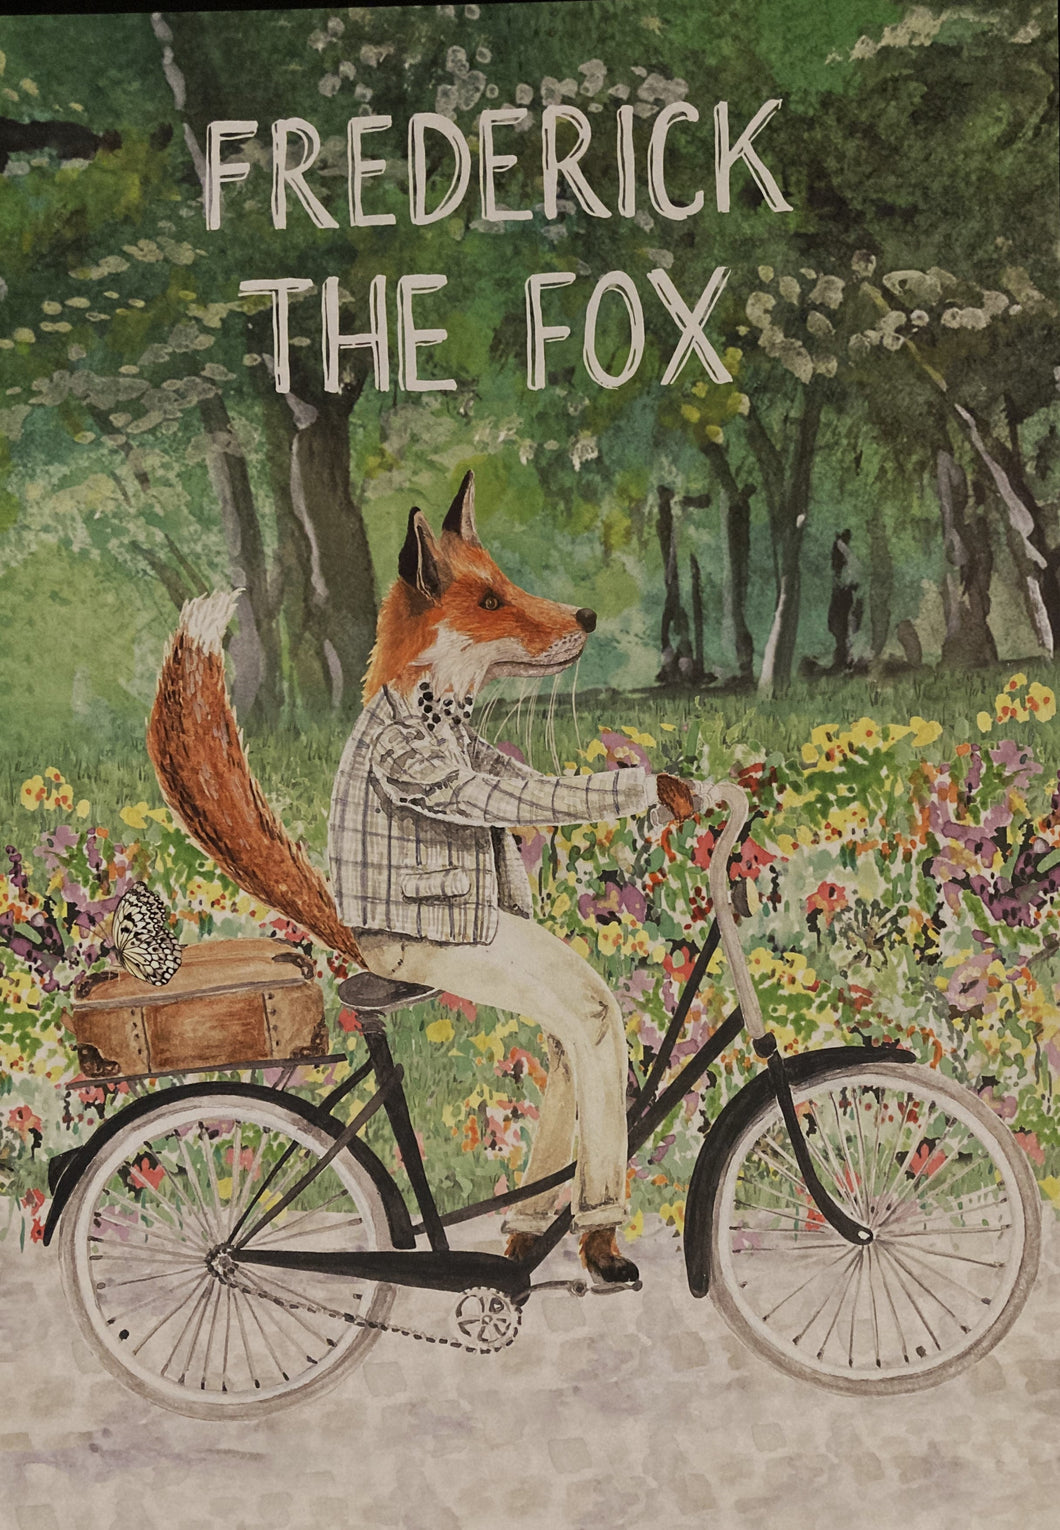 Children`s Animal Alphabet A2 poster - Frederick the Fox, original design beautifully hand painted with water colors - Original Music and Movie Posters for sale from Bamalama - Online Poster Store UK London